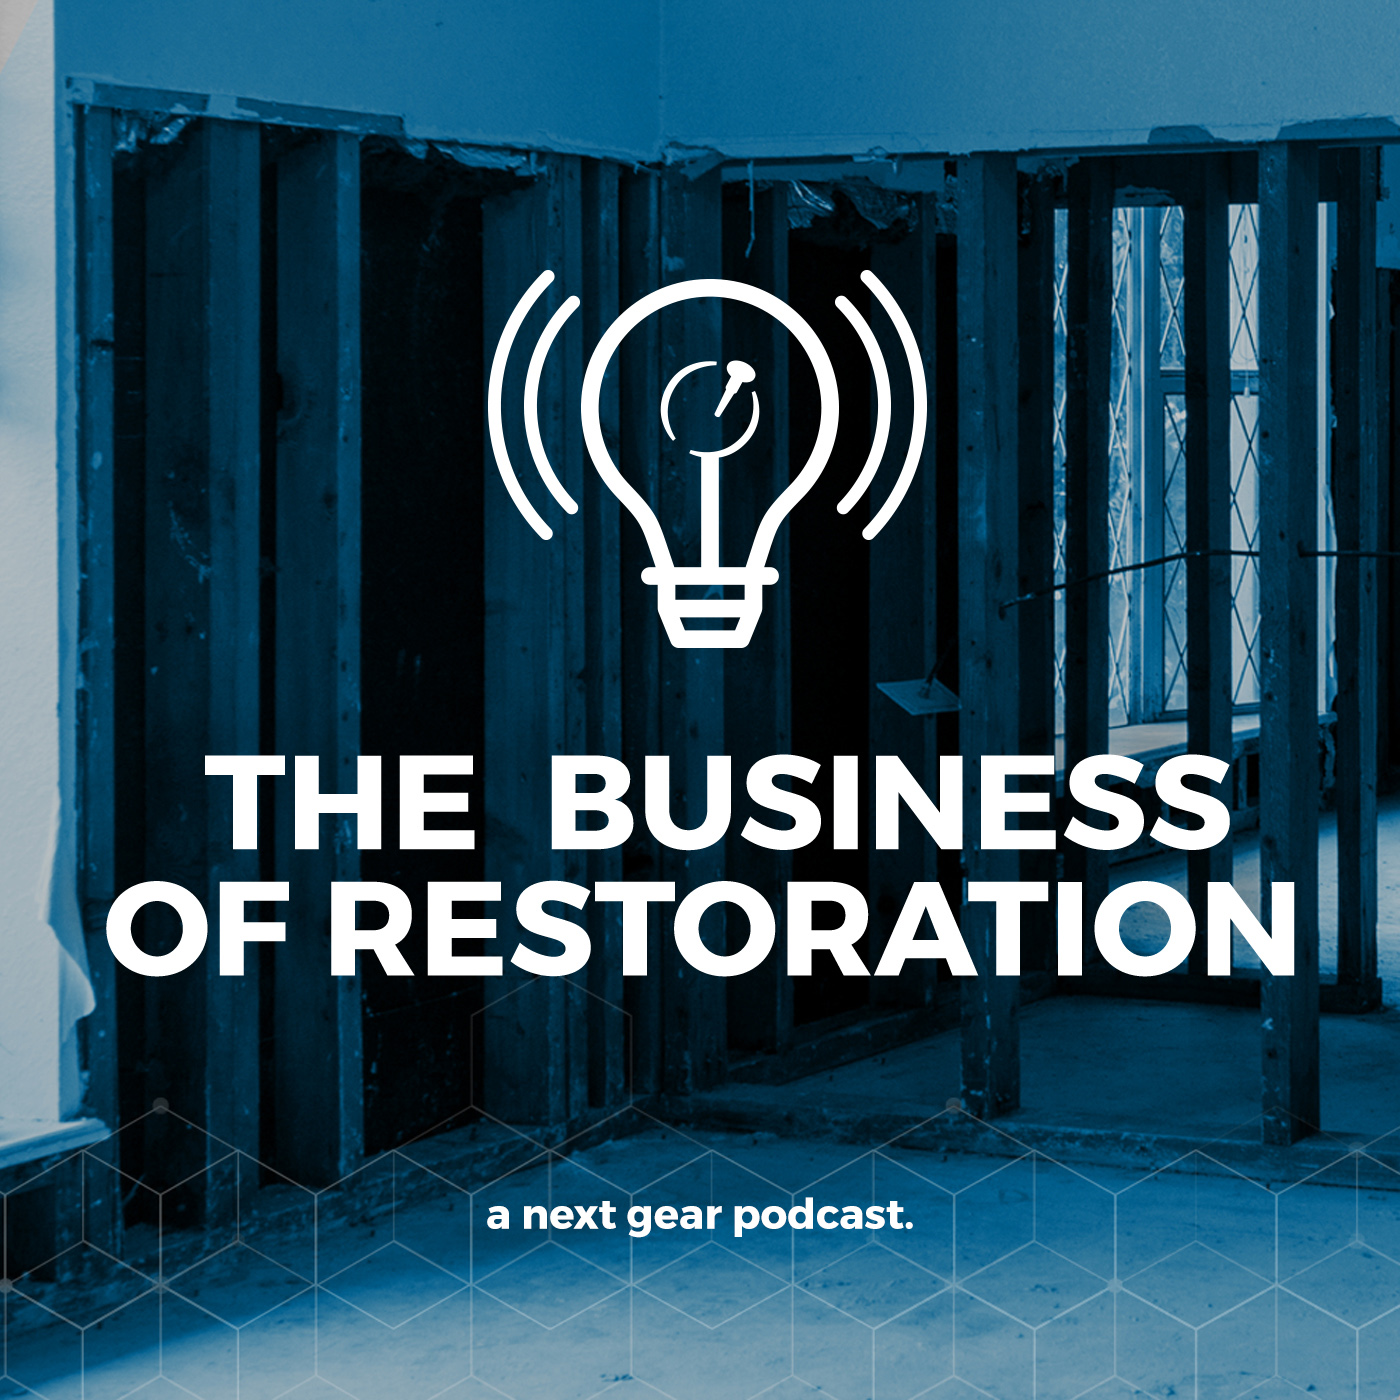 The Business of Restoration